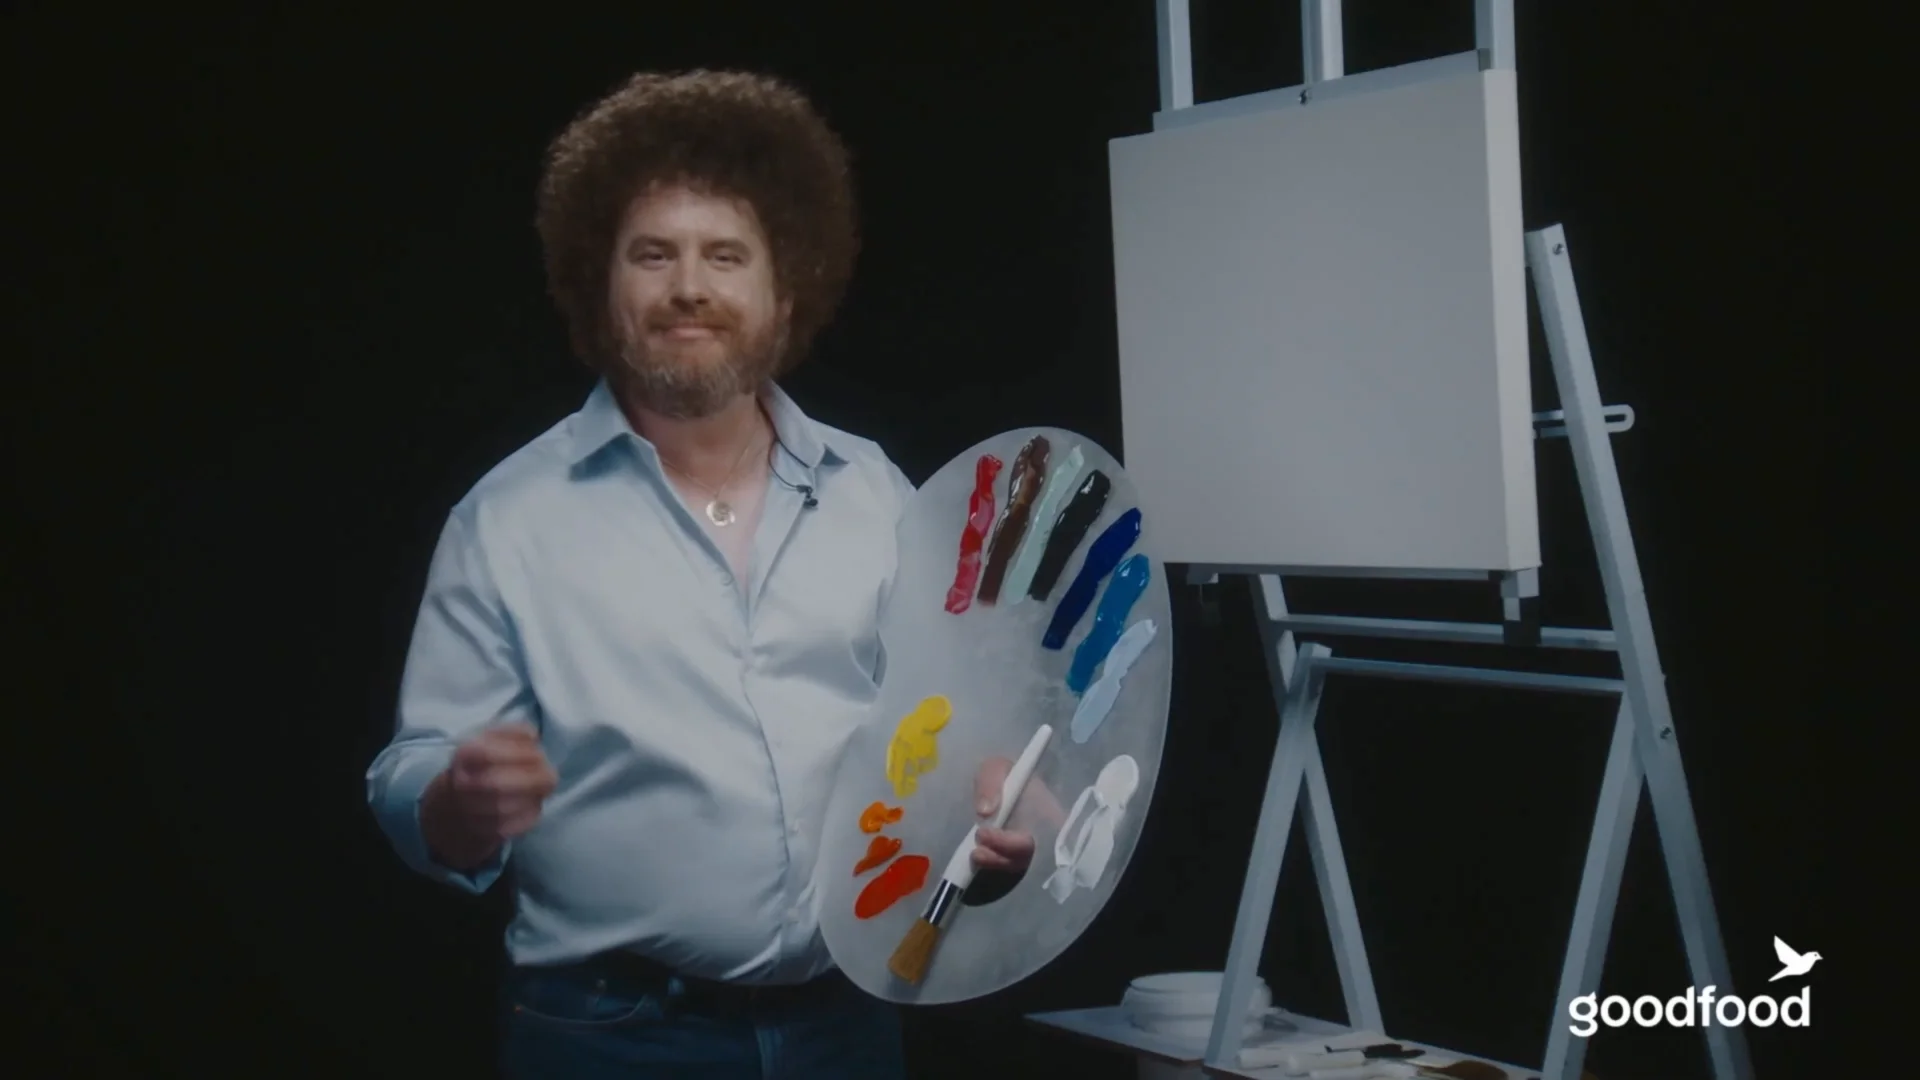 Bob Ross Channeled in Latest ad by Goodfood